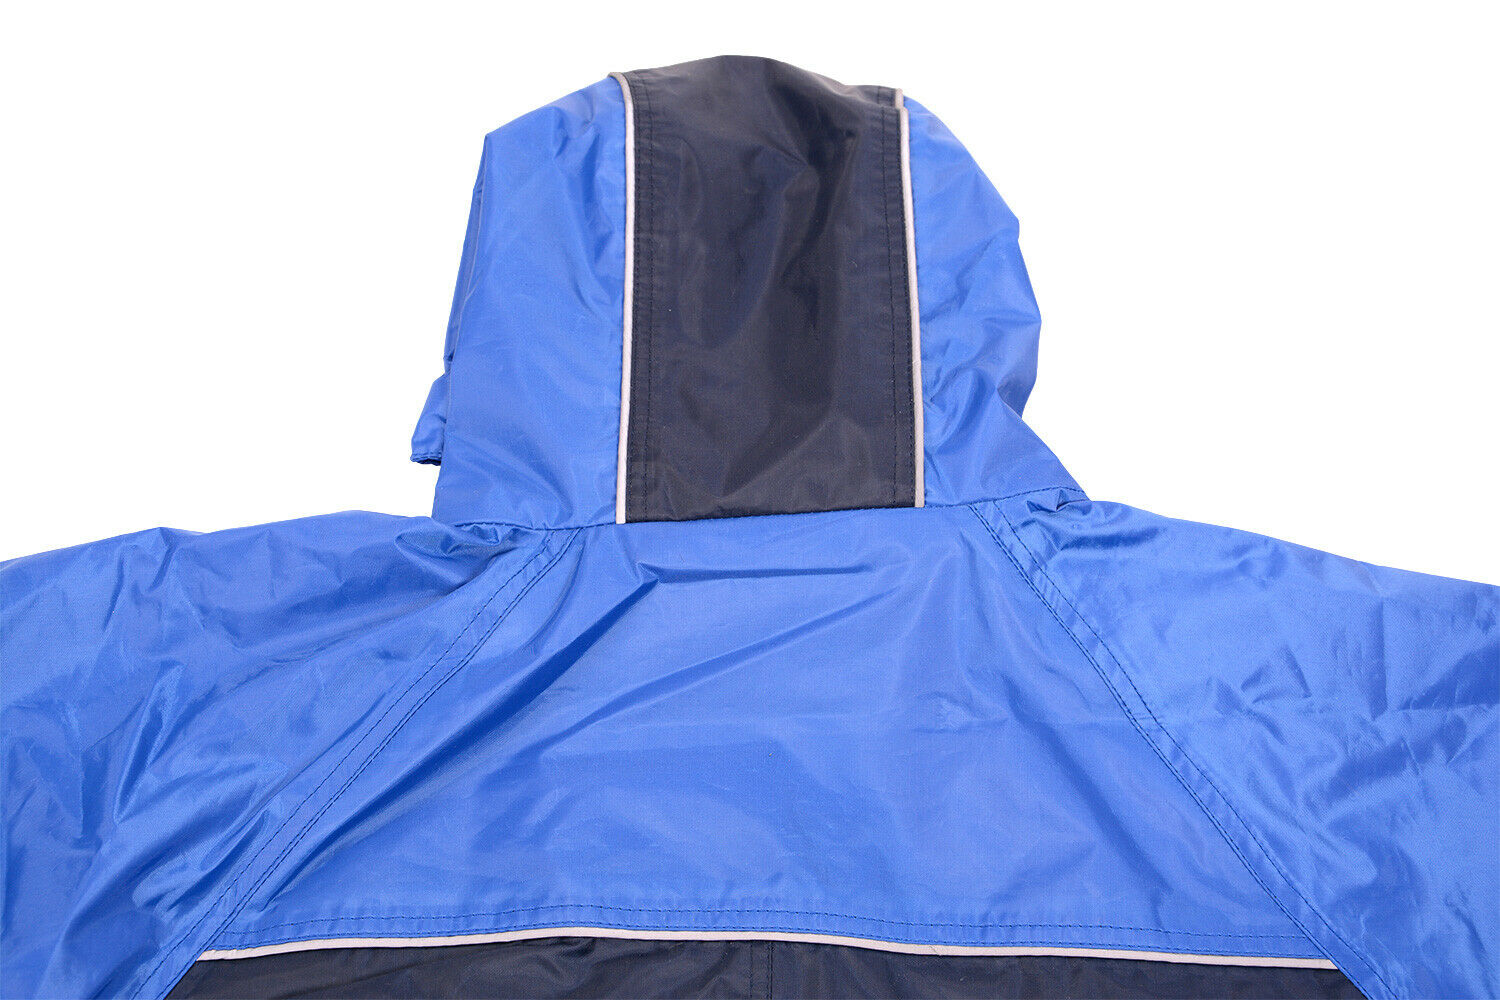 Dry Kids 2 Colour Waterproof Rainsuit, Childrens All in One Fun Dry ...